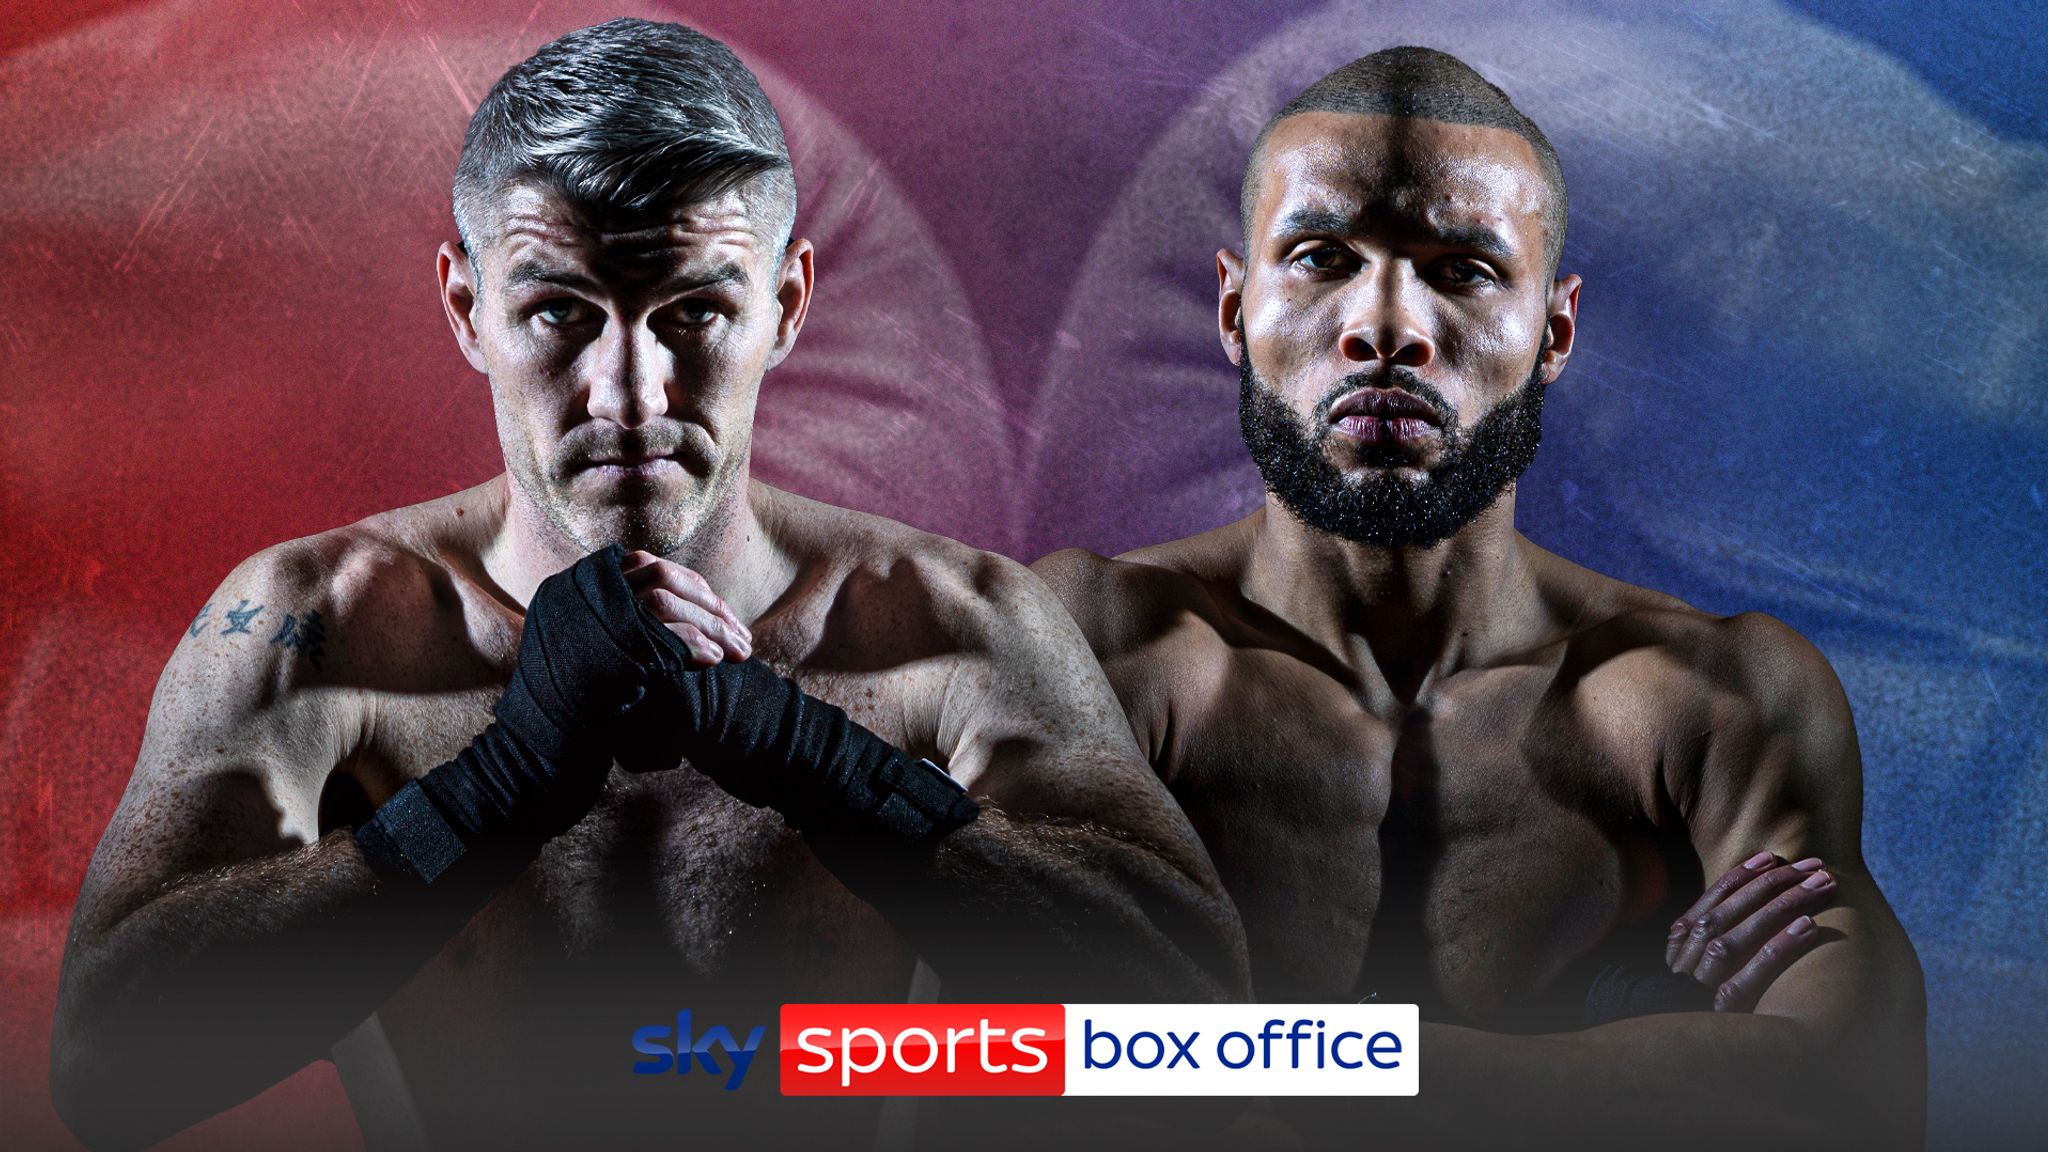 Liam Smith vs Chris Eubank Jr 2 Predictions from boxing experts ahead of big rematch in Manchester Boxing News Sky Sports